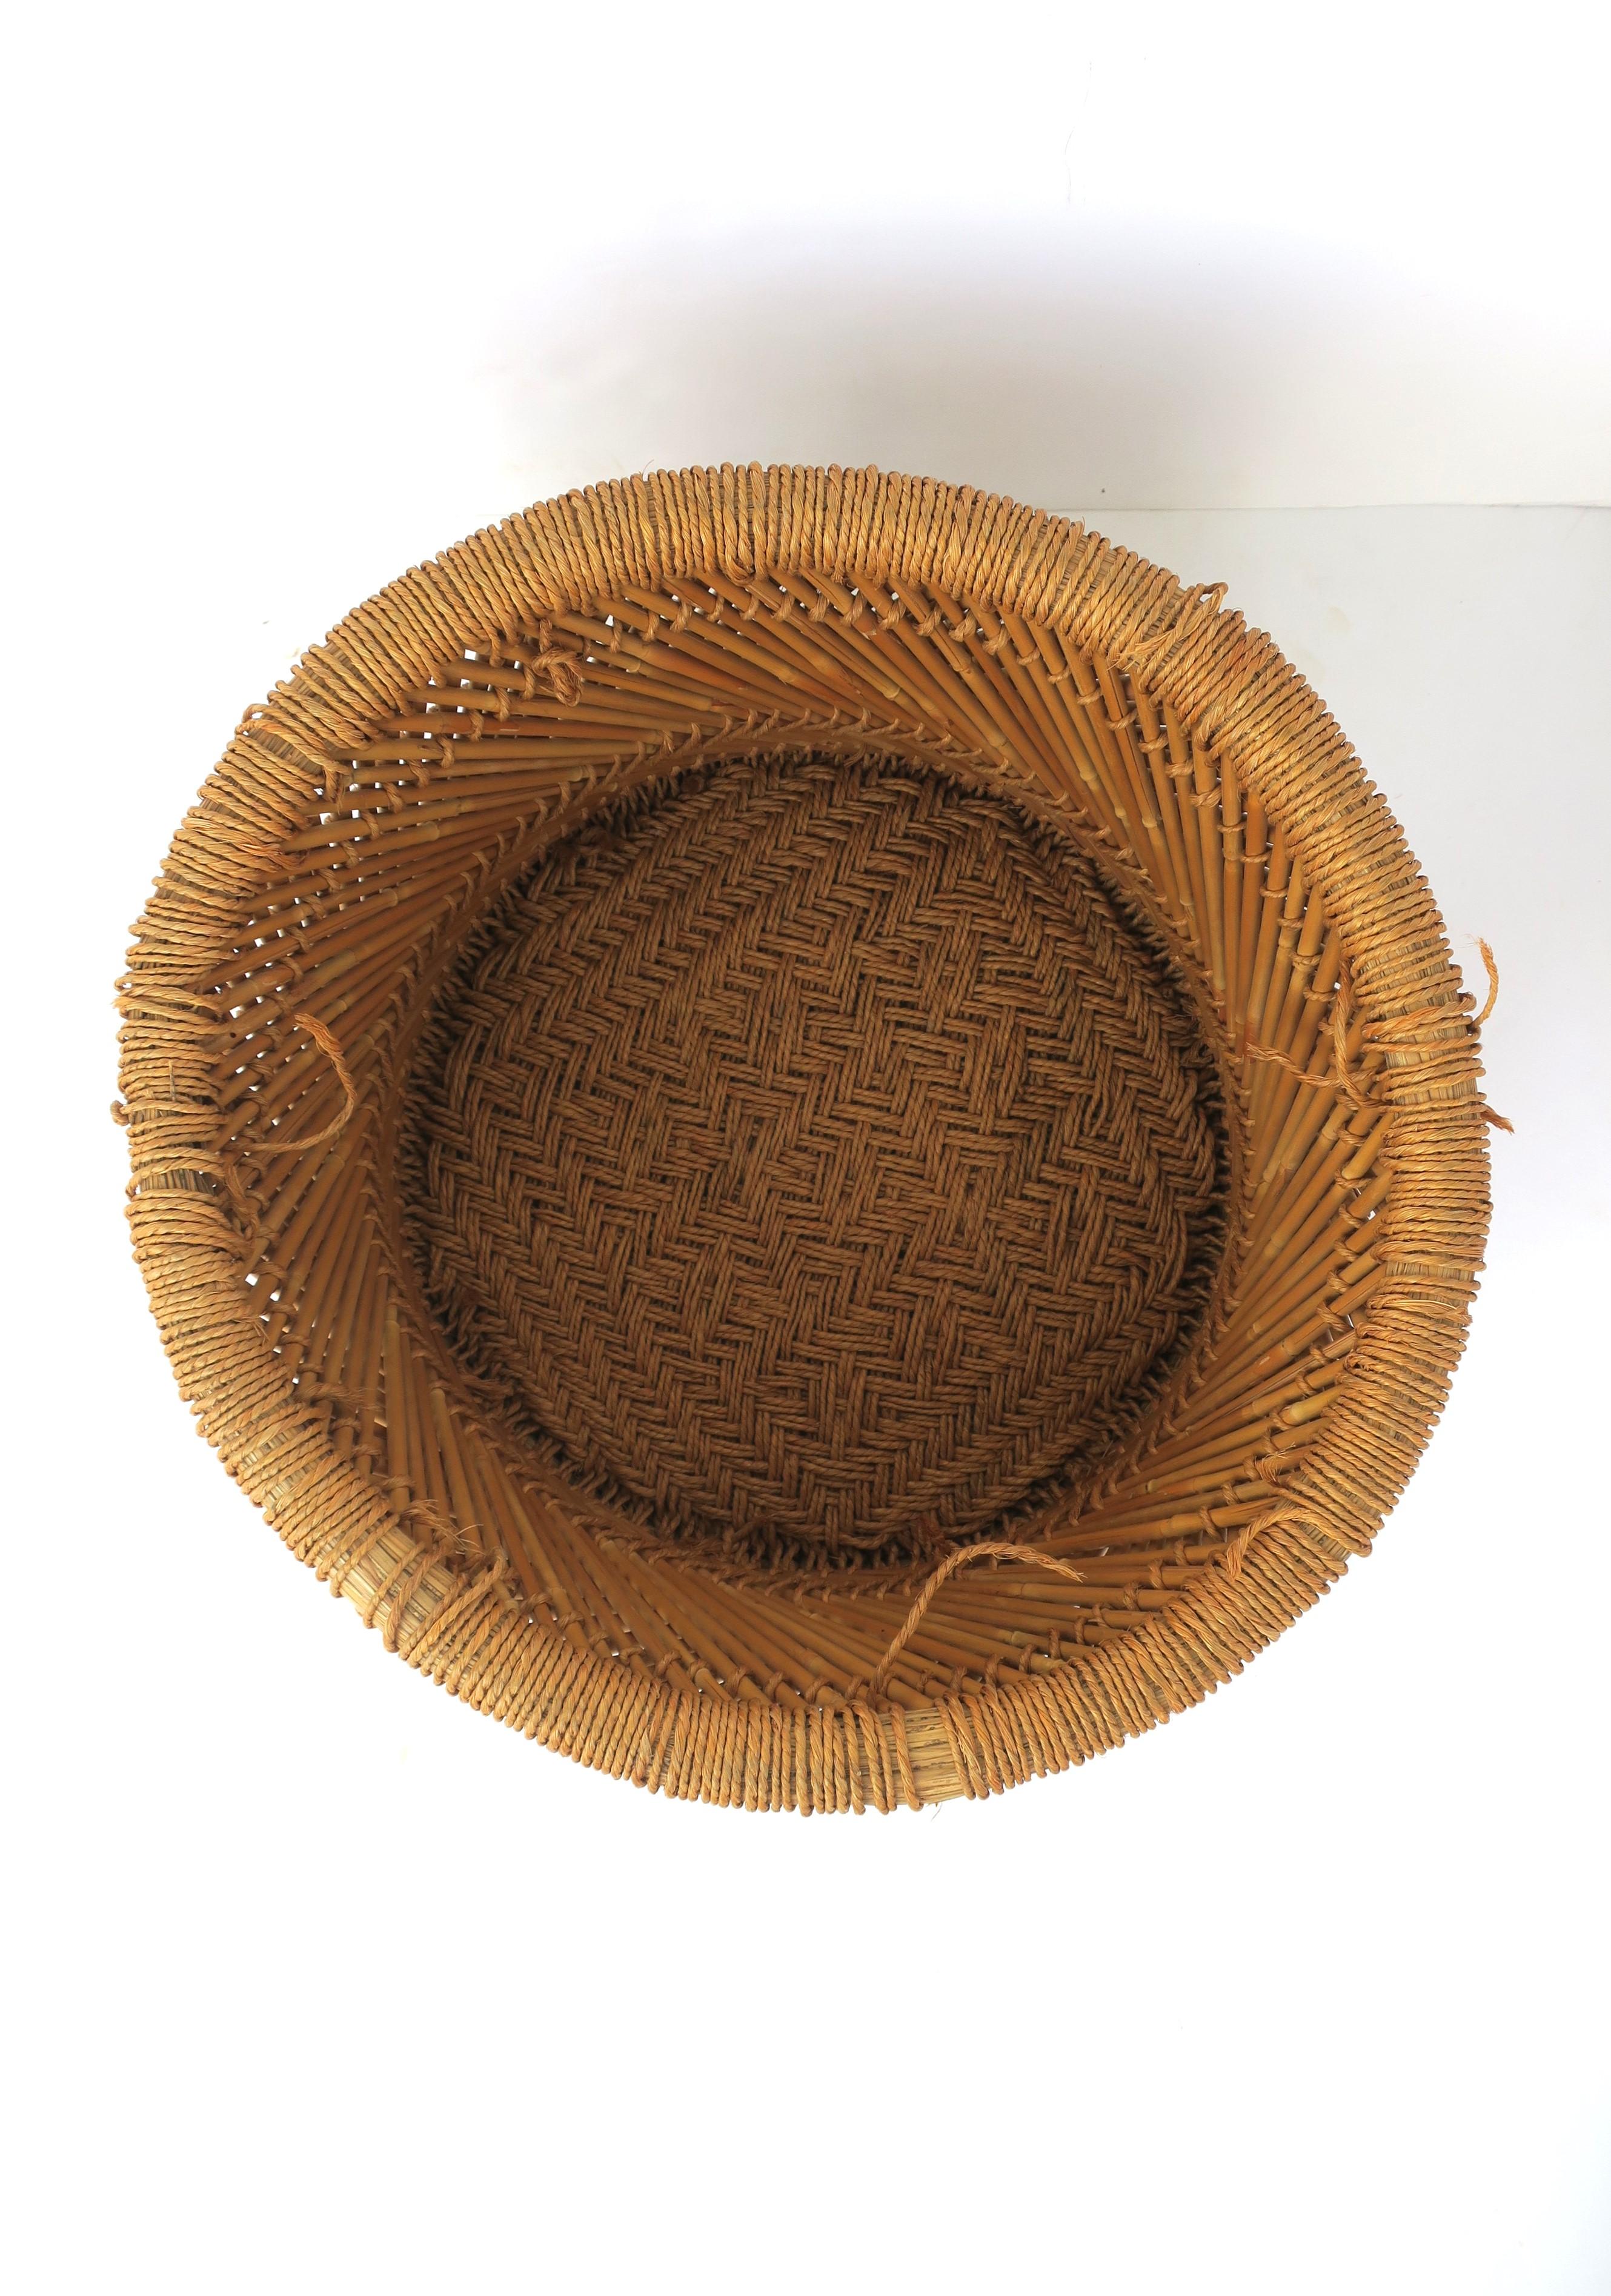 Wicker Rope Pedestal Stool or Drinks Table  For Sale 5